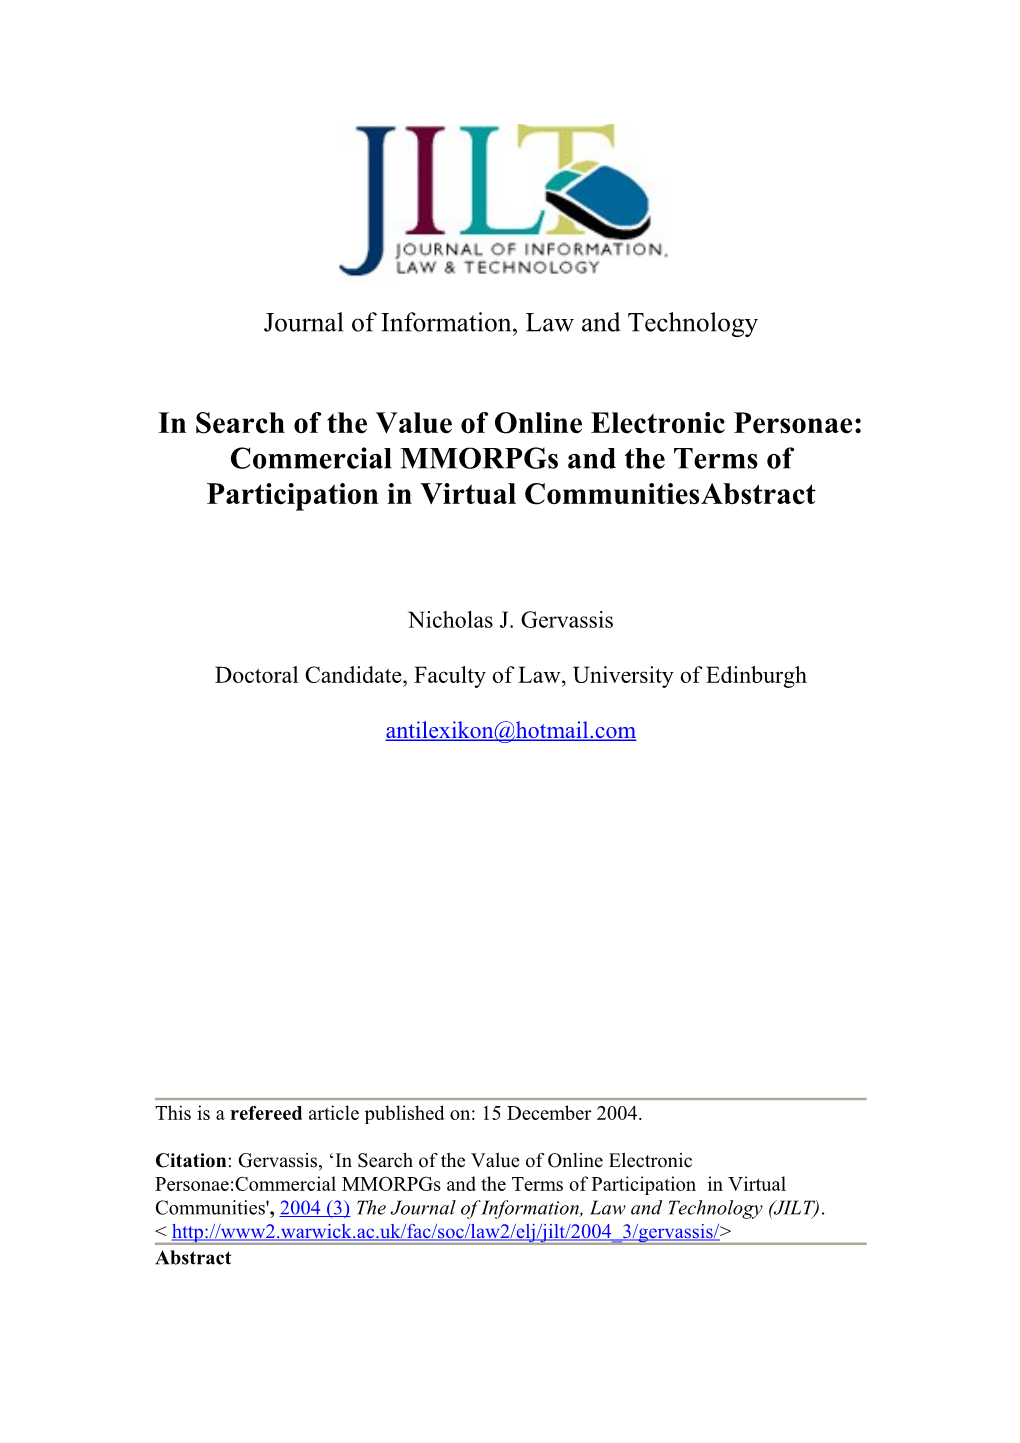 In Search of the Value of Online Electronic Personae